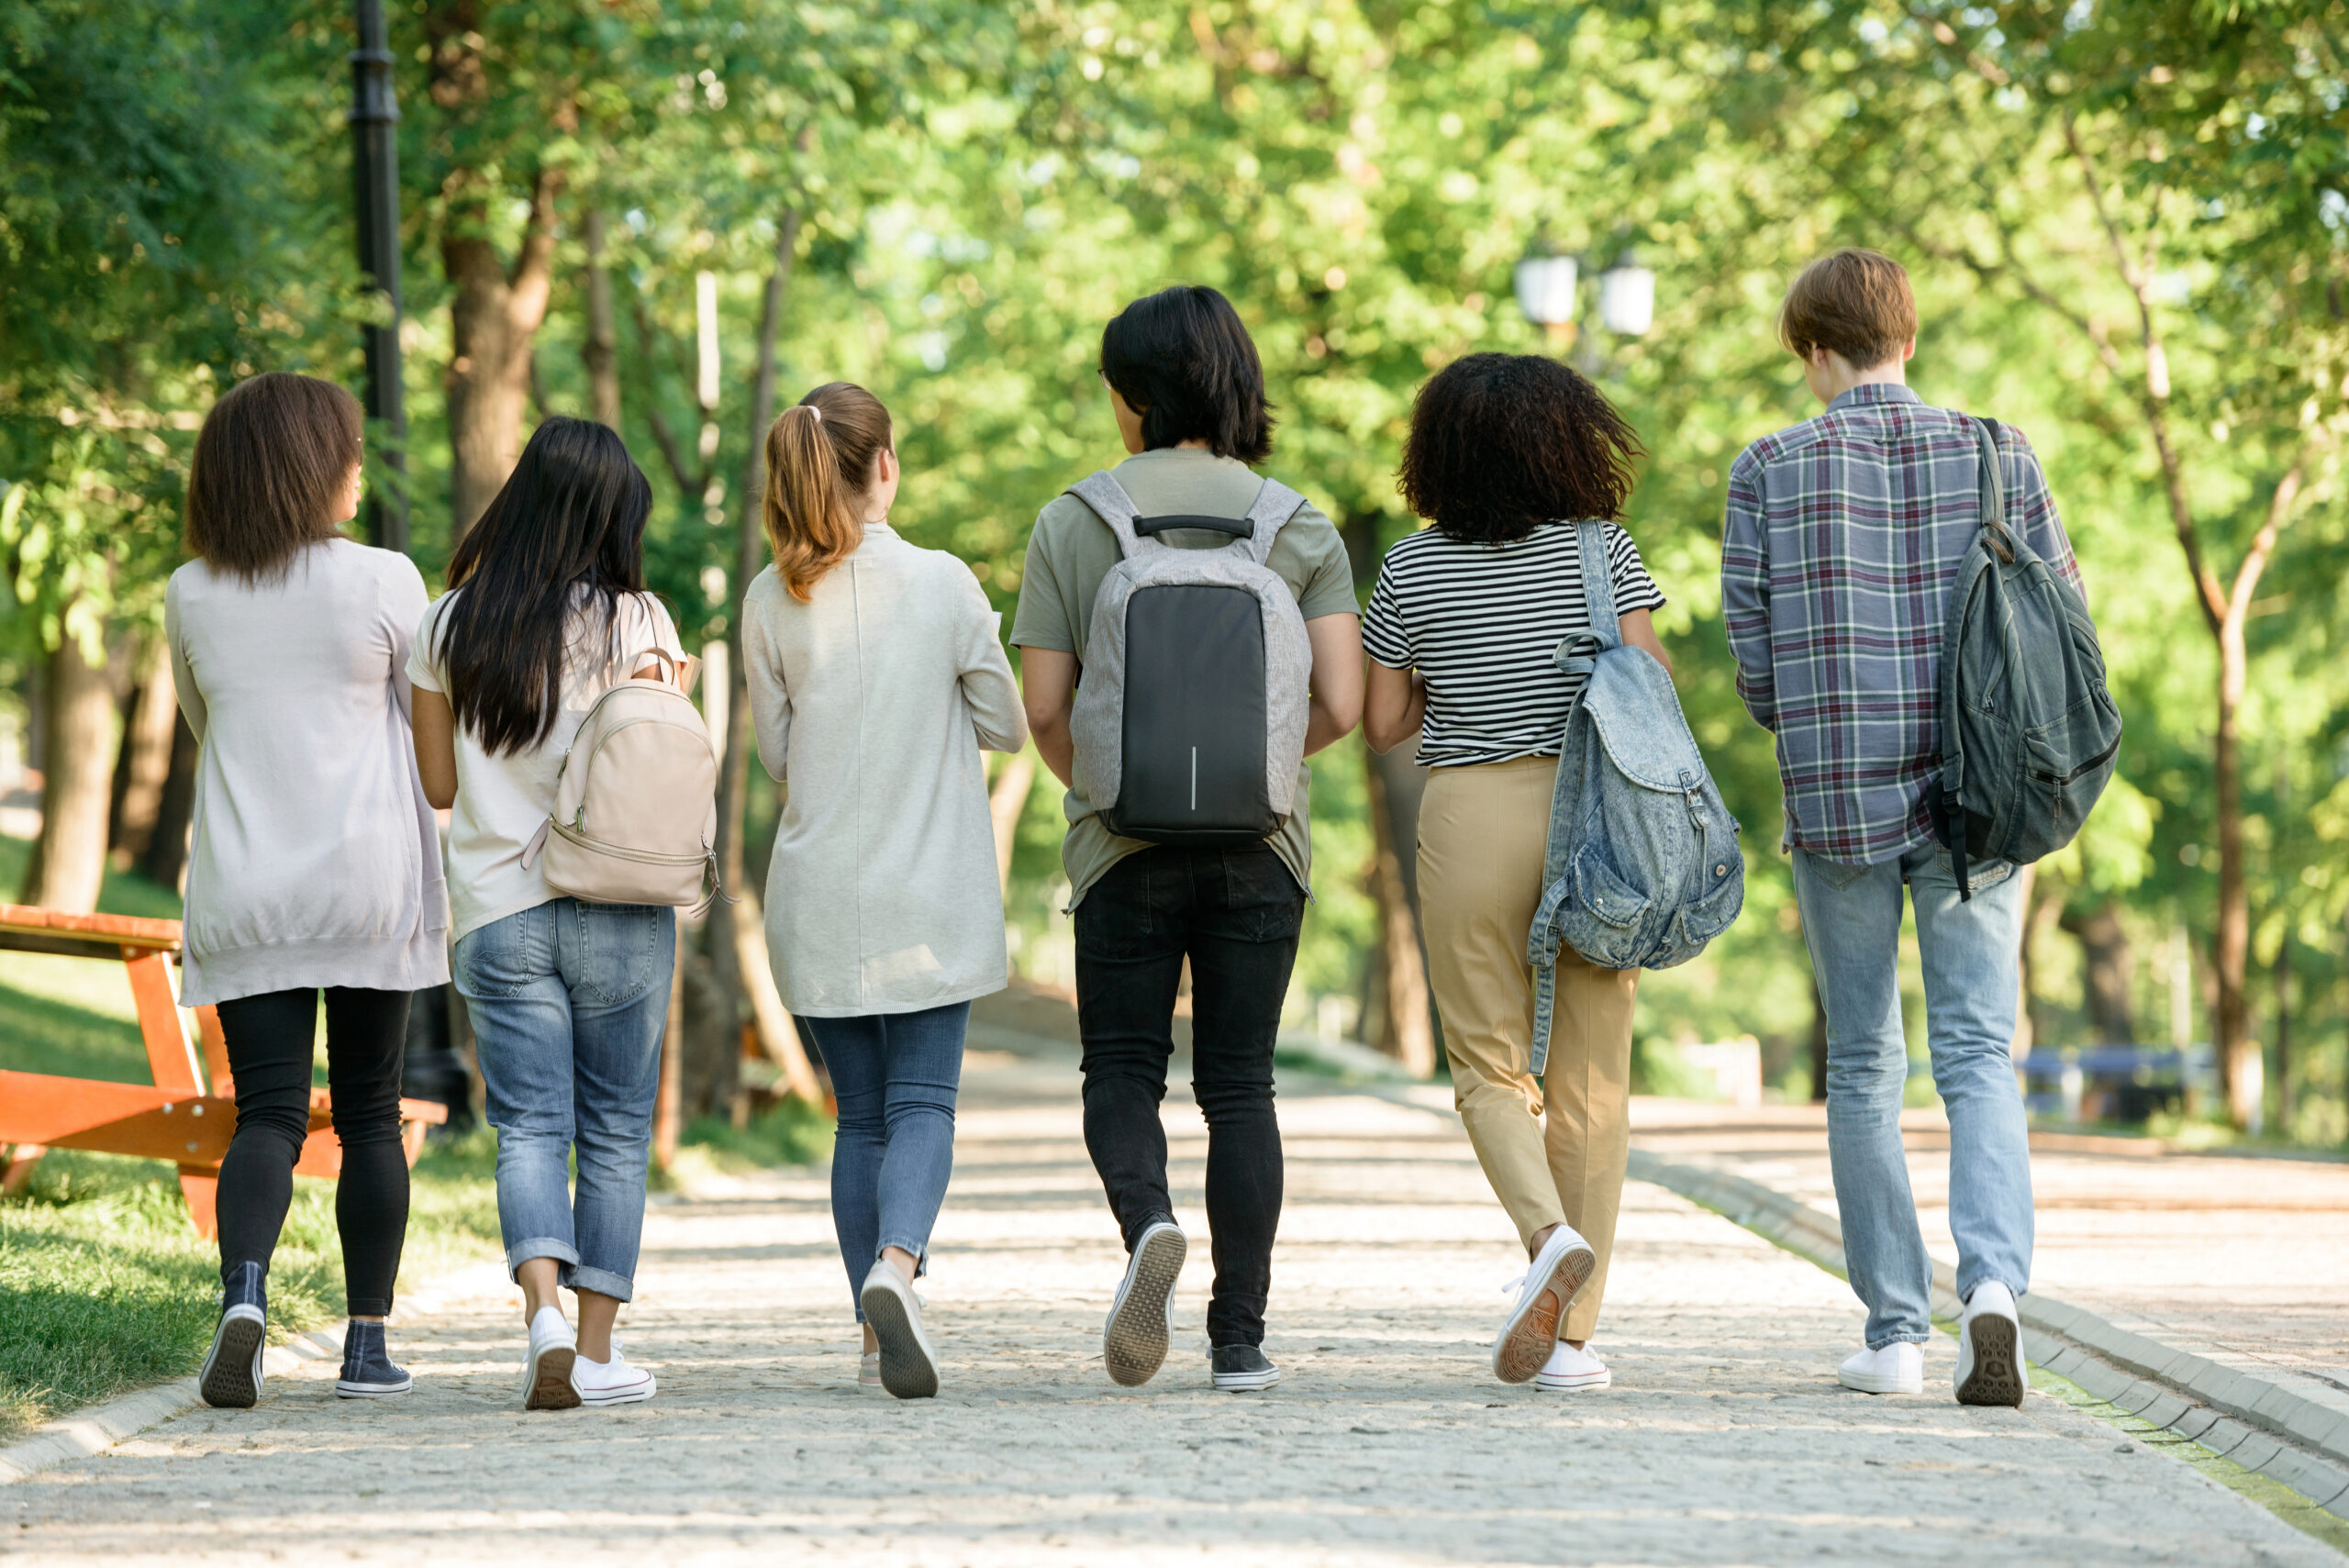 Back view image of multiethnic group of young students walking while talking.